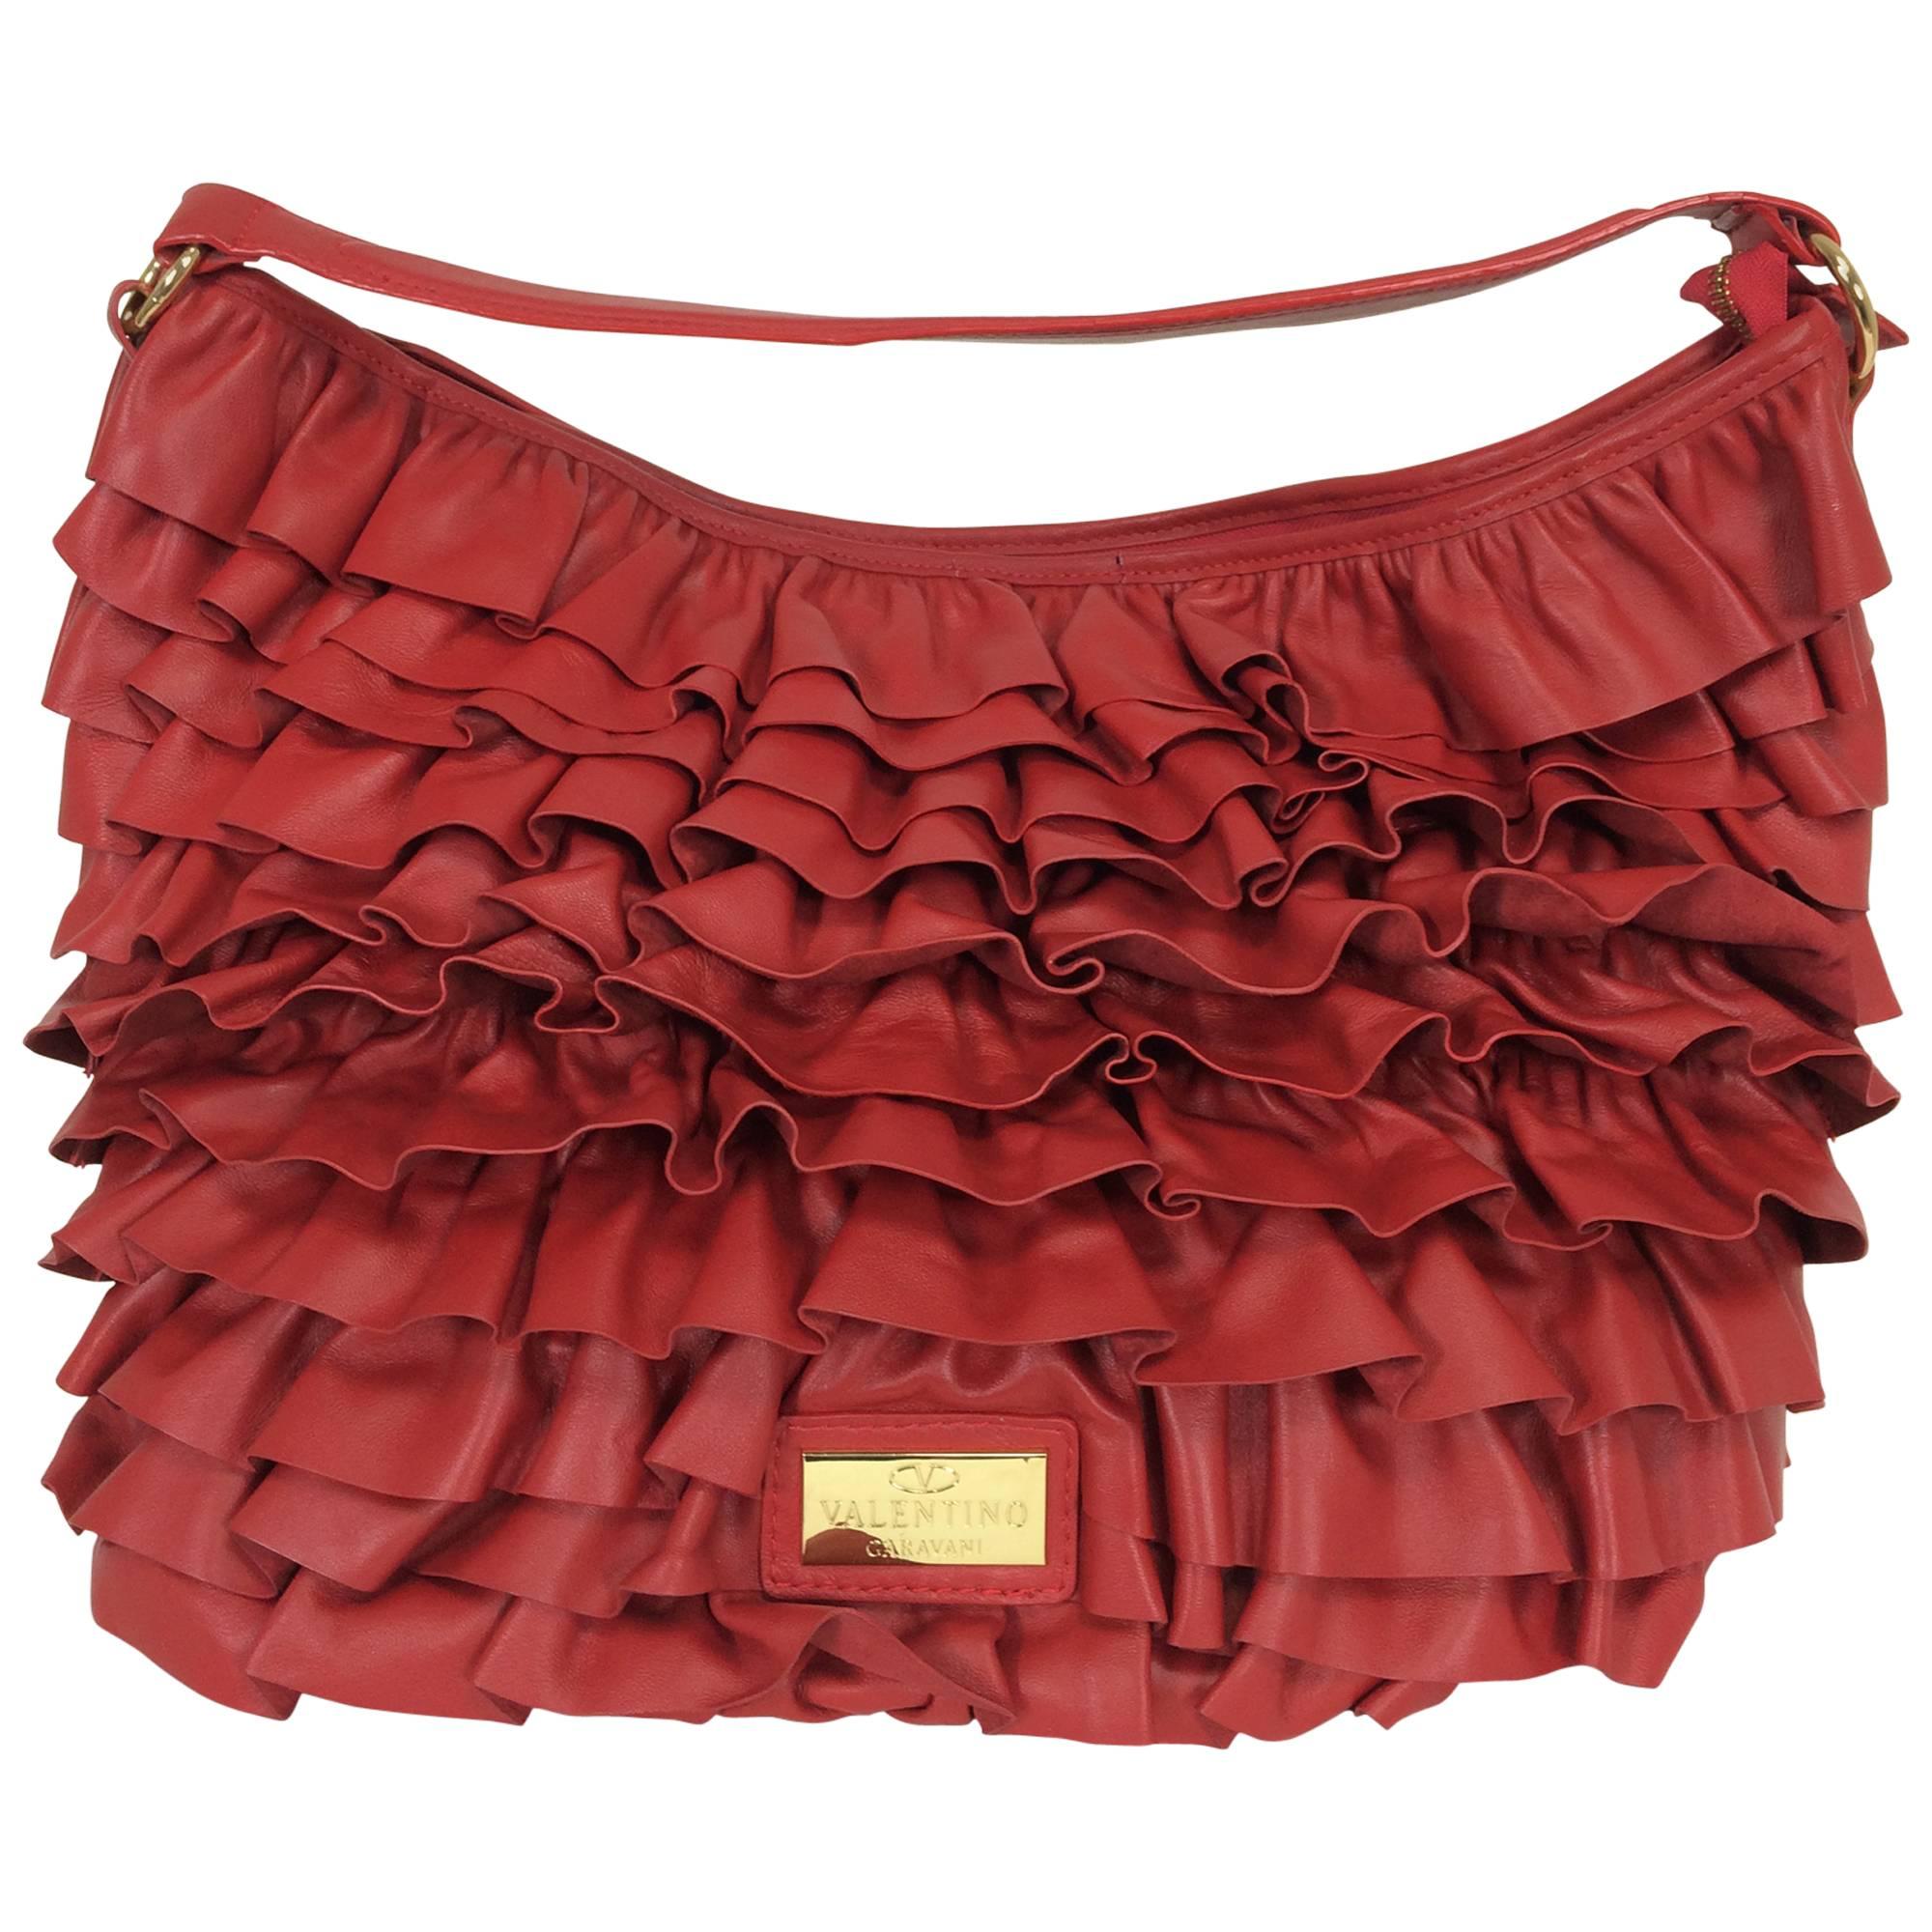 Valentino large red leather ruffle shoulder bag